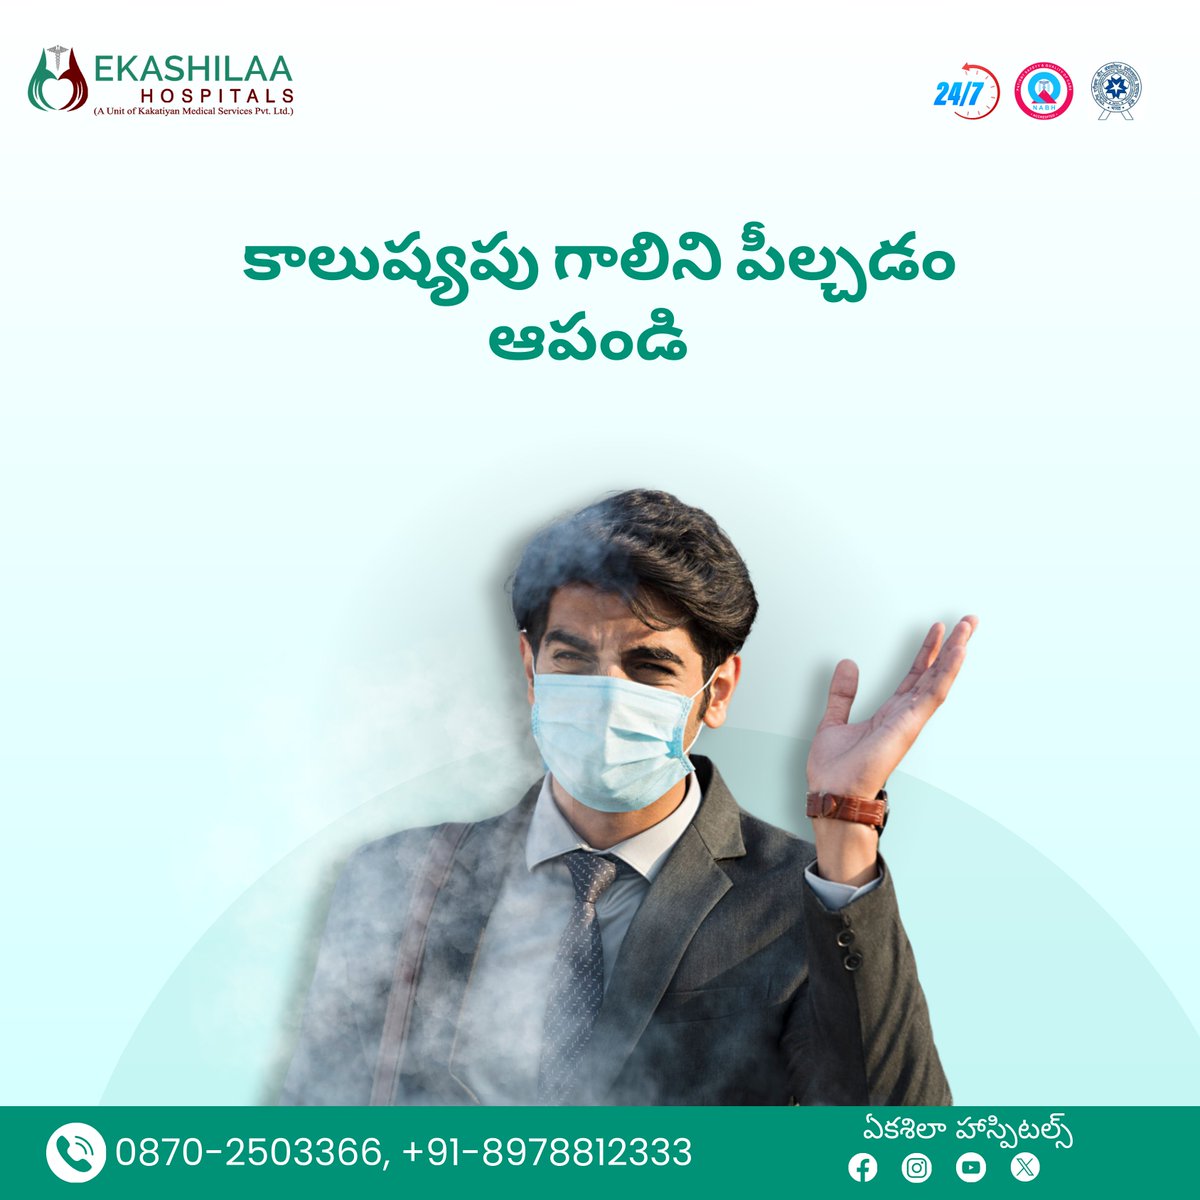 Breathe freely! Join the fight against polluted air. Share tips or DM to join
Schedule Your Appointment Today
📞0870-2503366,91-8978812333
#CleanAir #breathe #FreshAndNewEntertainment #ekashilaahospitals #warangal #TrendingNow #AirPollution #infection #disease #healthcare #retwit